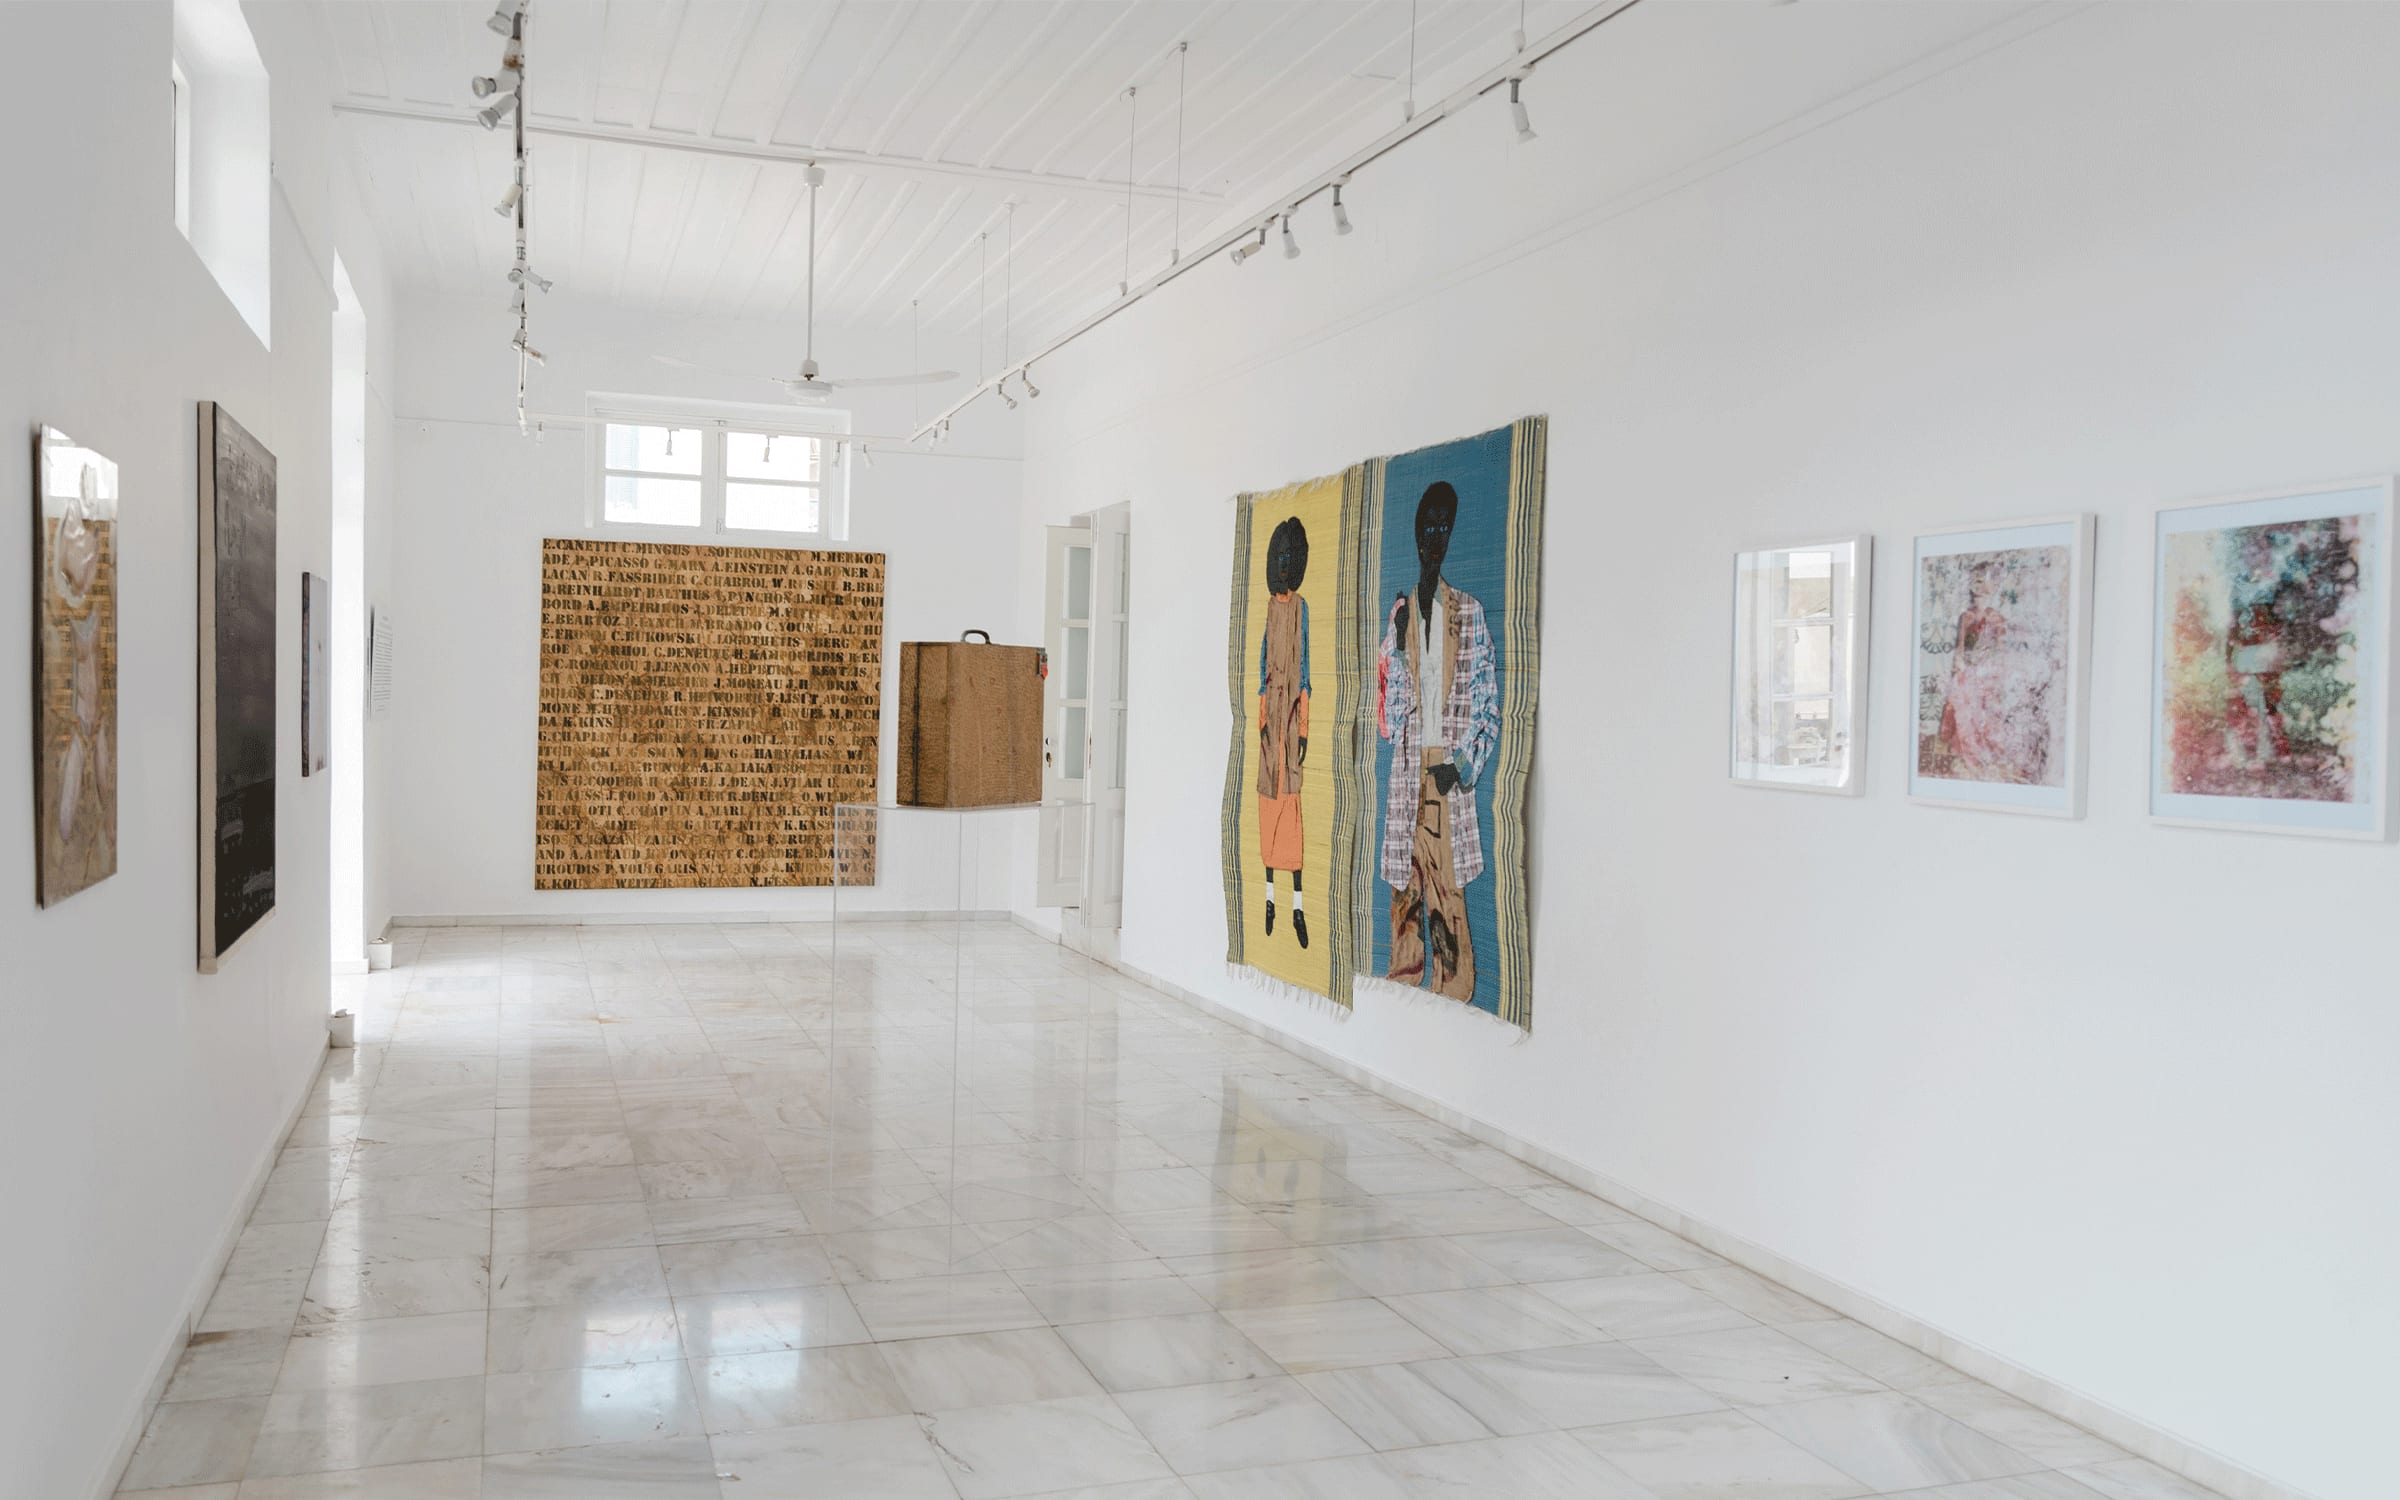 Installation view of group show 'In(de)finite Selfhoods' at Citronne, Athens, 2022. Courtesy of Citronne Galleries.